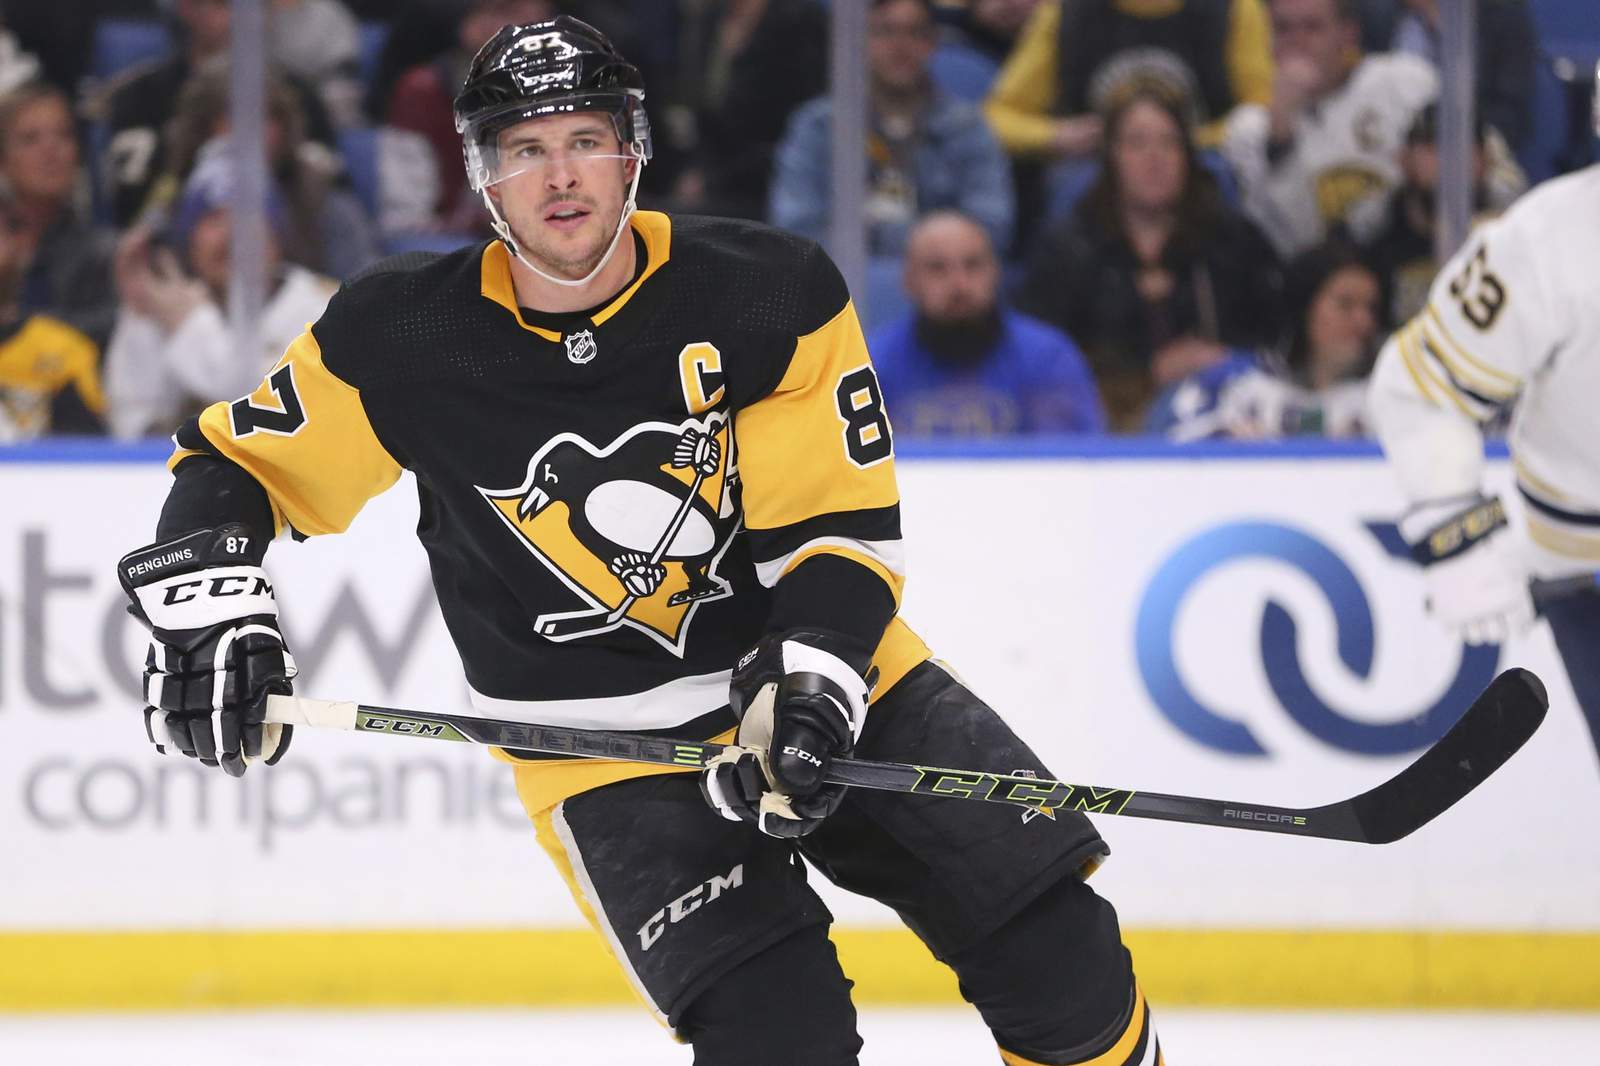 Penguins star Crosby misses practice with undisclosed issue